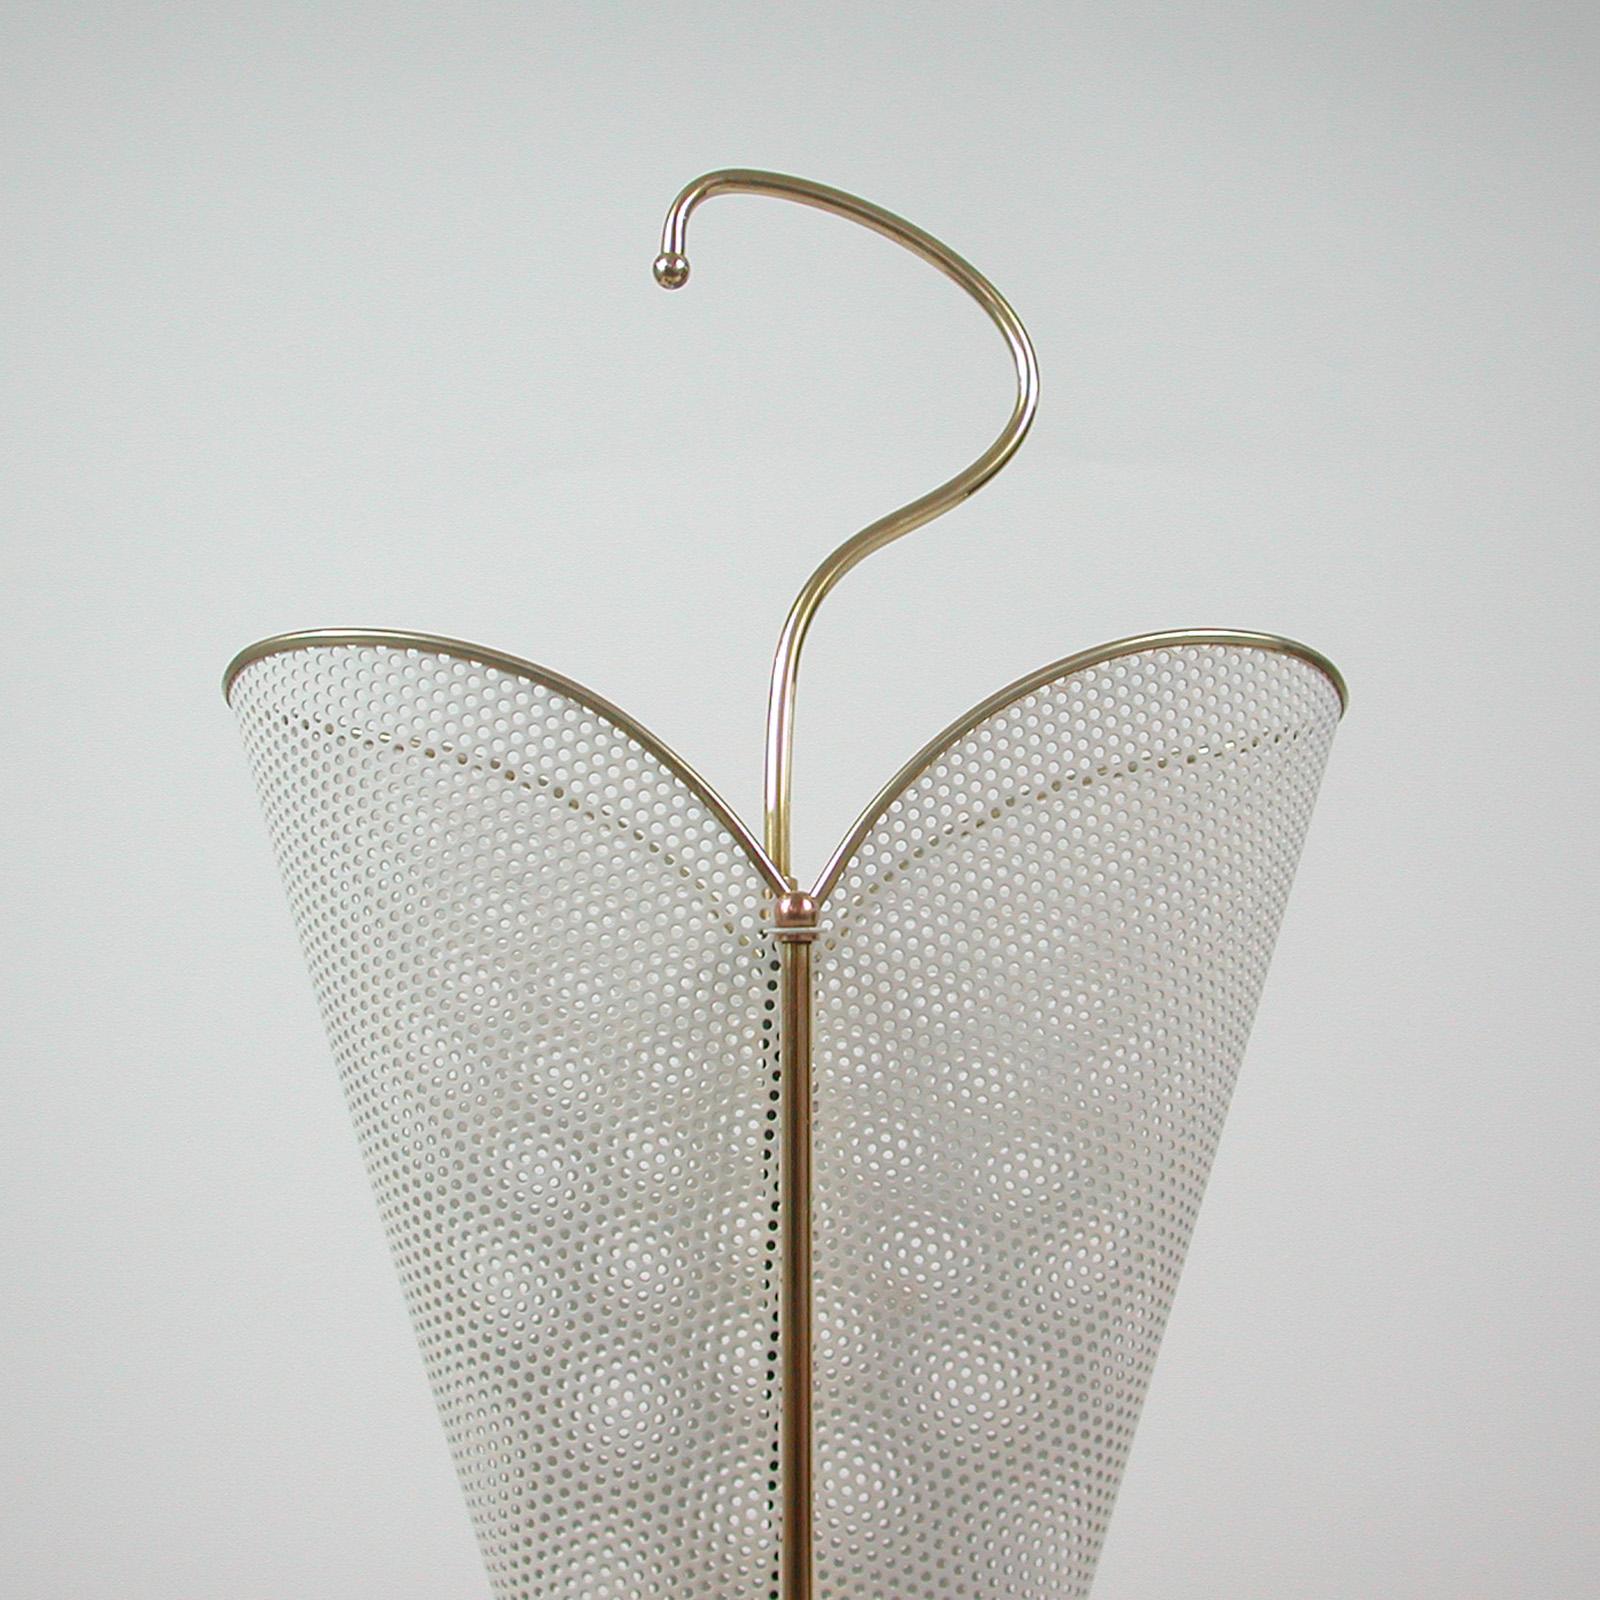 French Midcentury Mategot Style White Umbrella Stand, 1950s For Sale 11